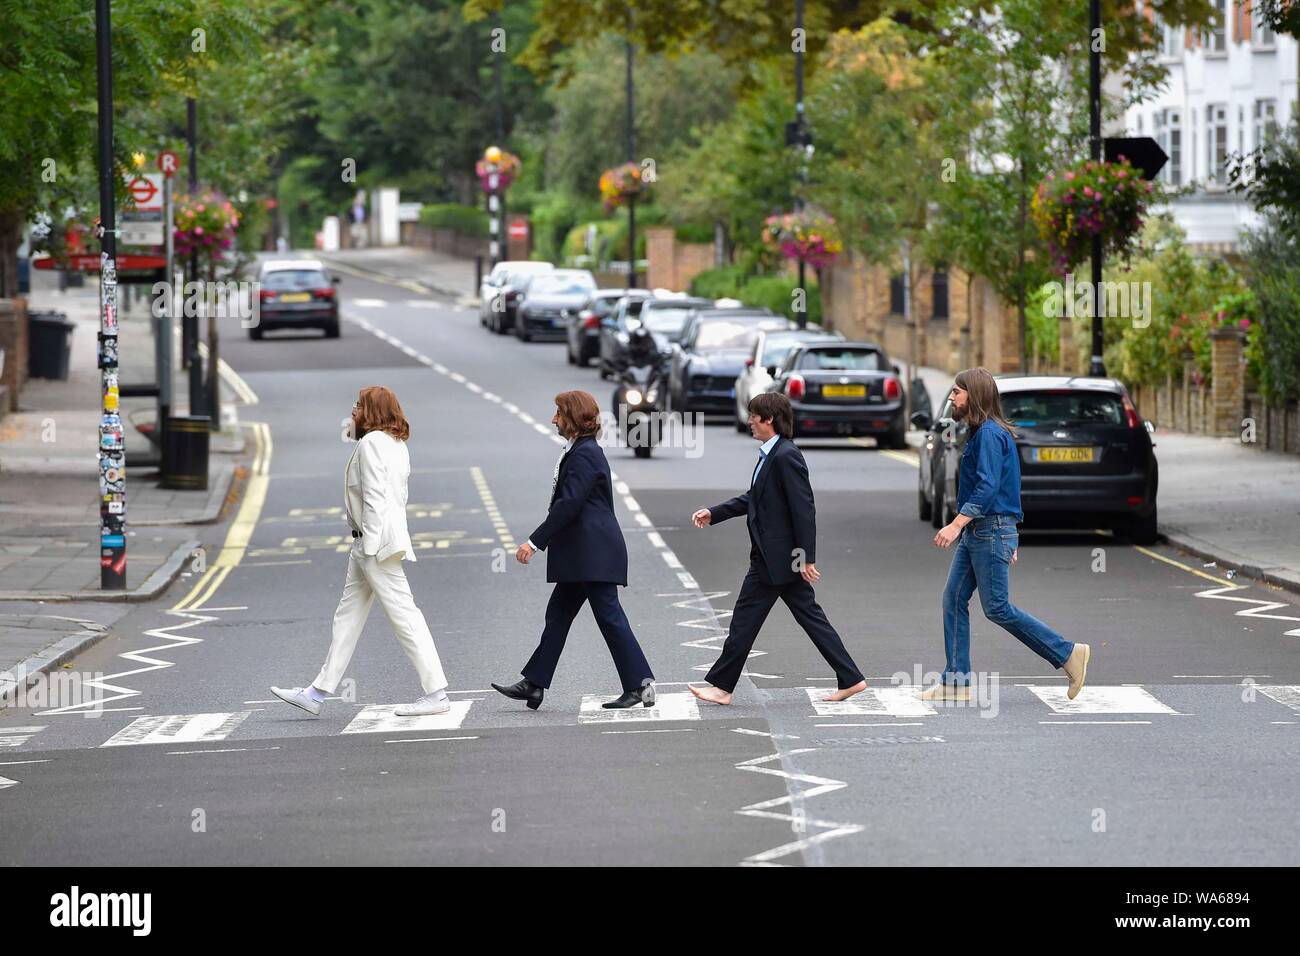 Abbey Road Studios Made a Second Beatles Crosswalk Because Tourists Are  Causing Traffic Jams